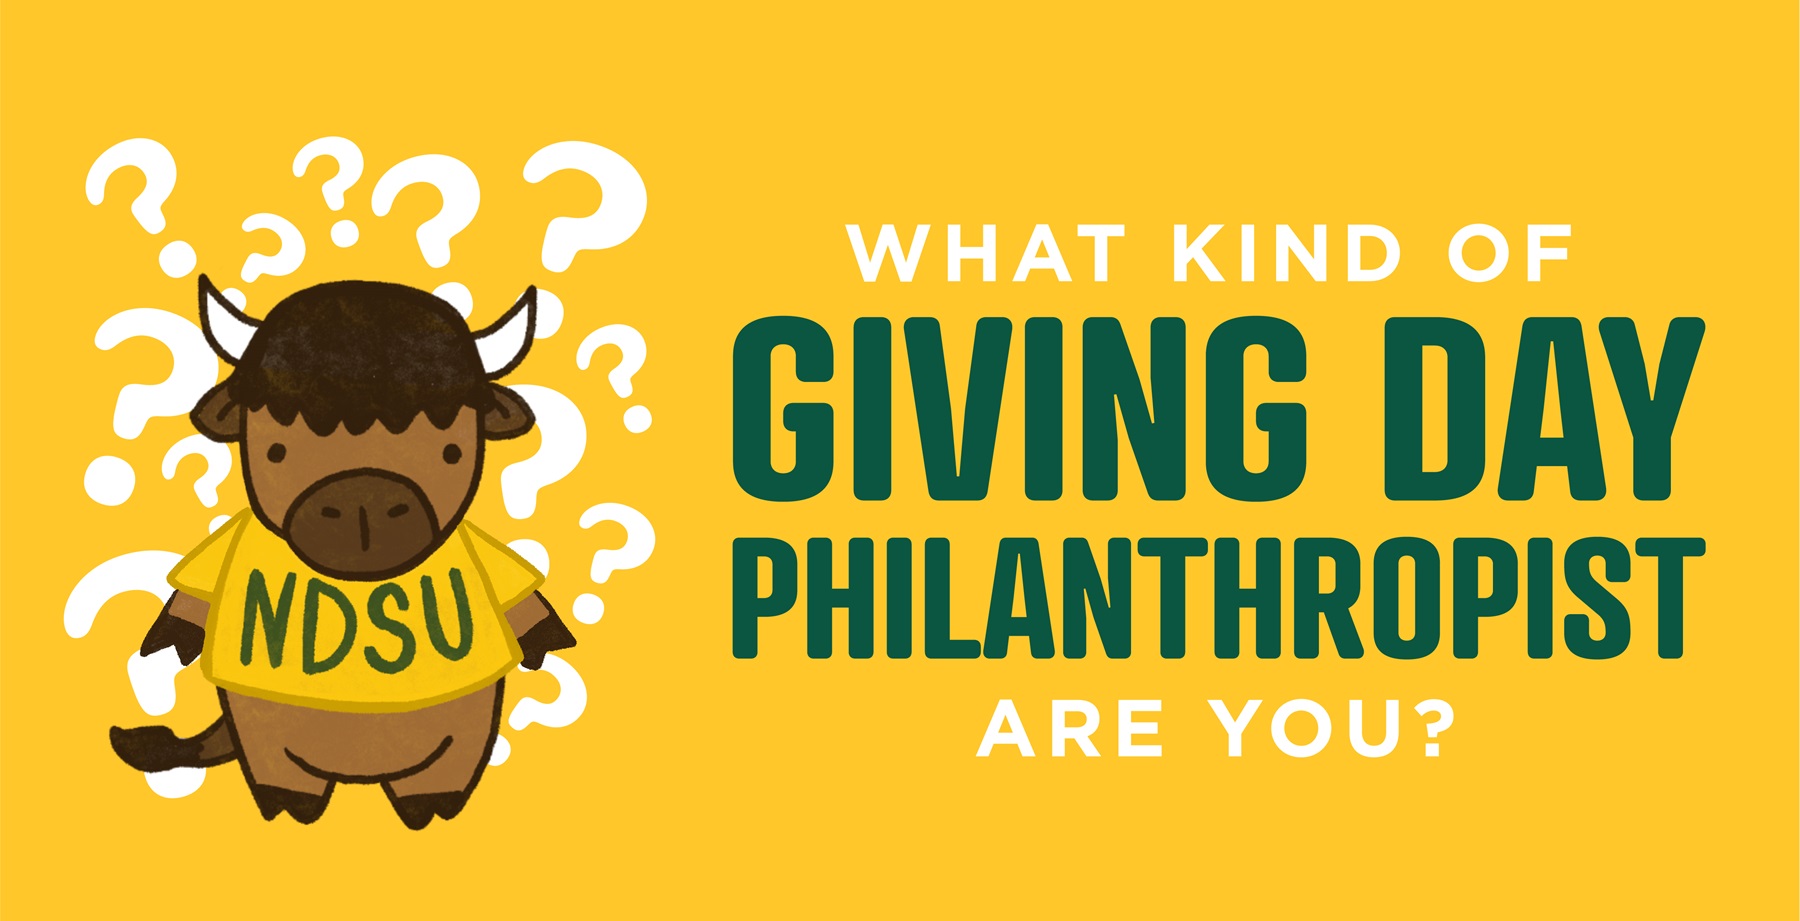 What kind of Giving Day Philanthropist are you?